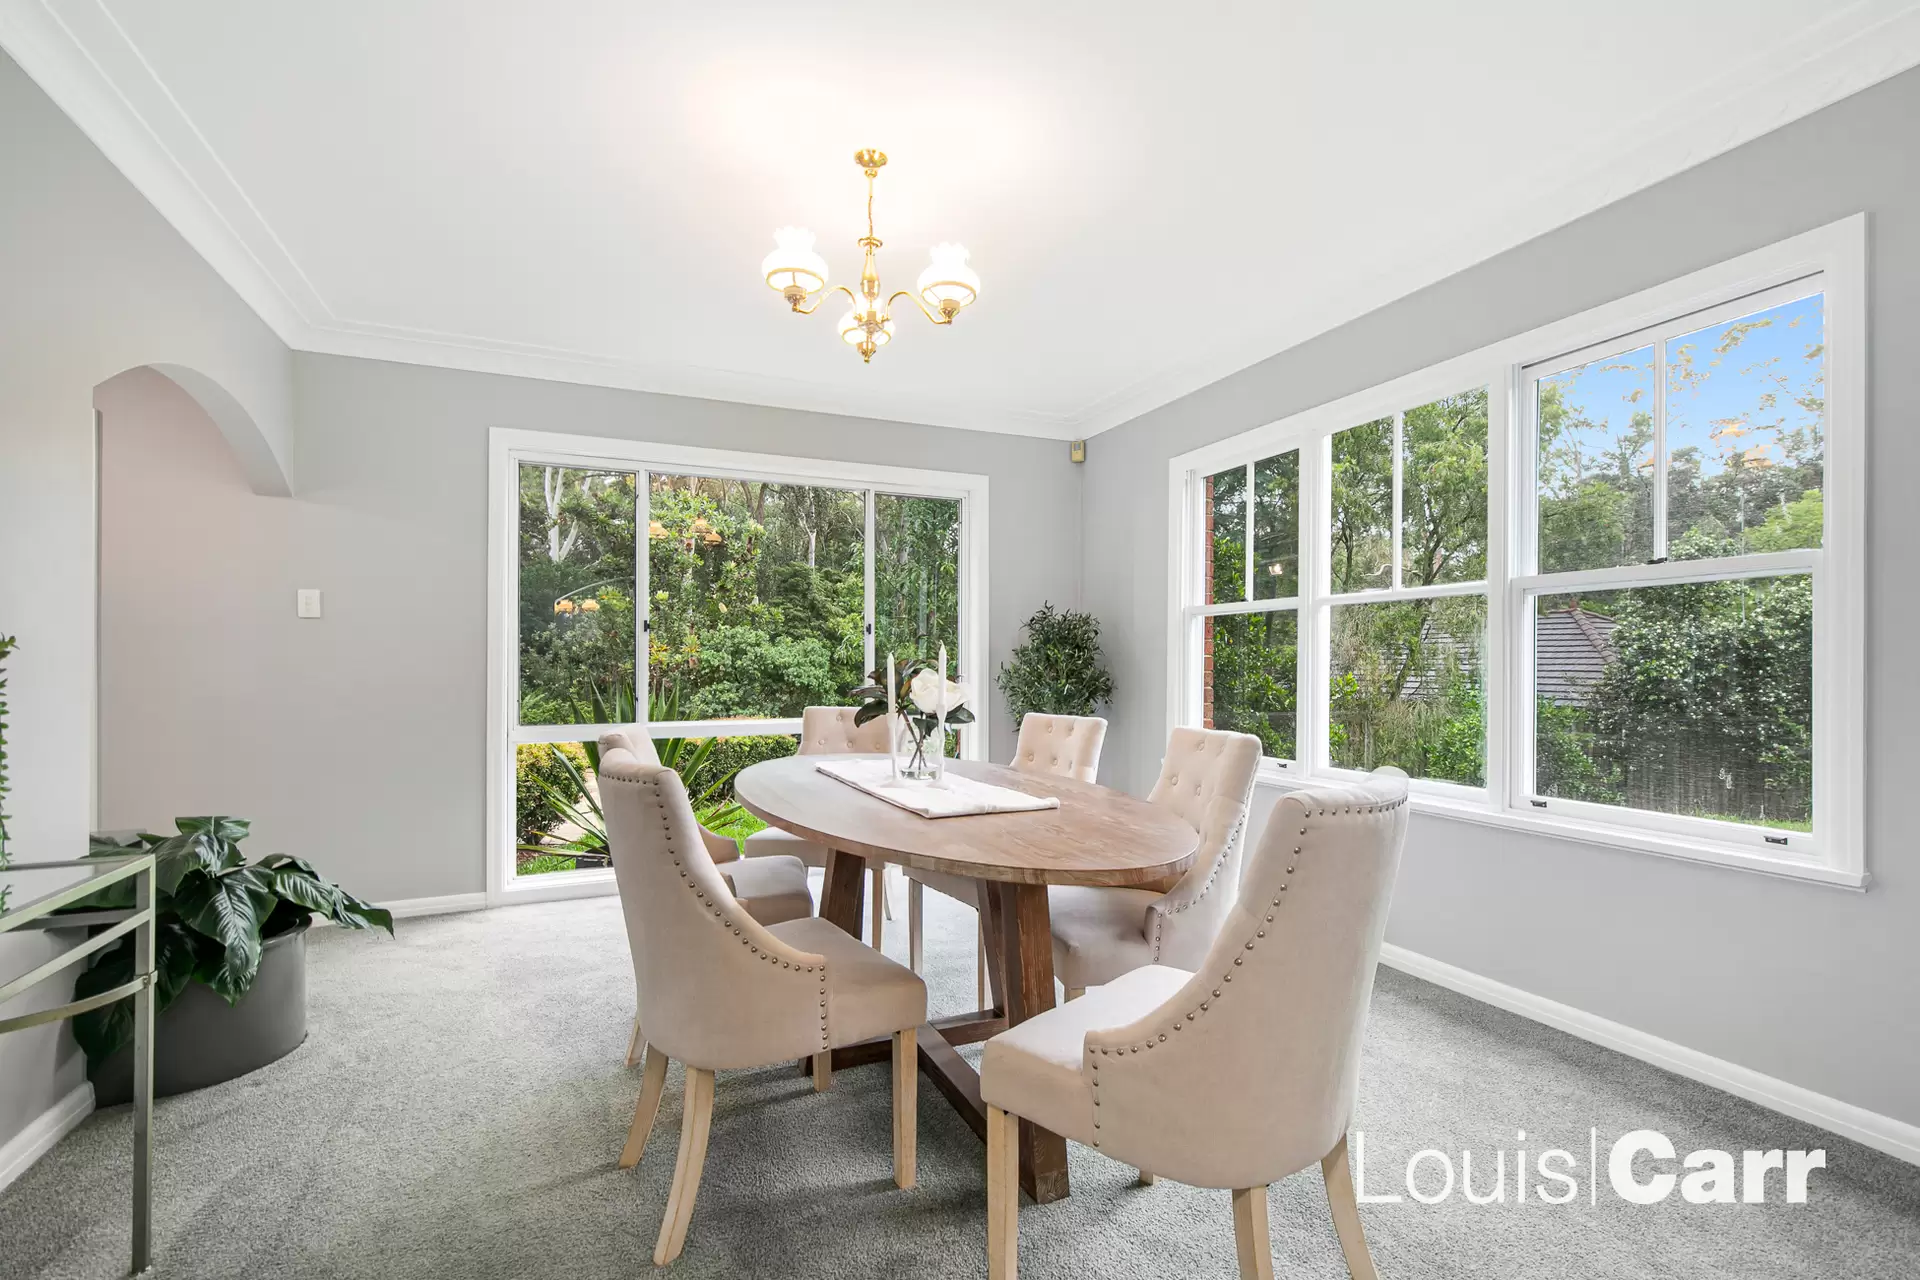 Photo #7: 22 Willowleaf Place, West Pennant Hills - For Sale by Louis Carr Real Estate